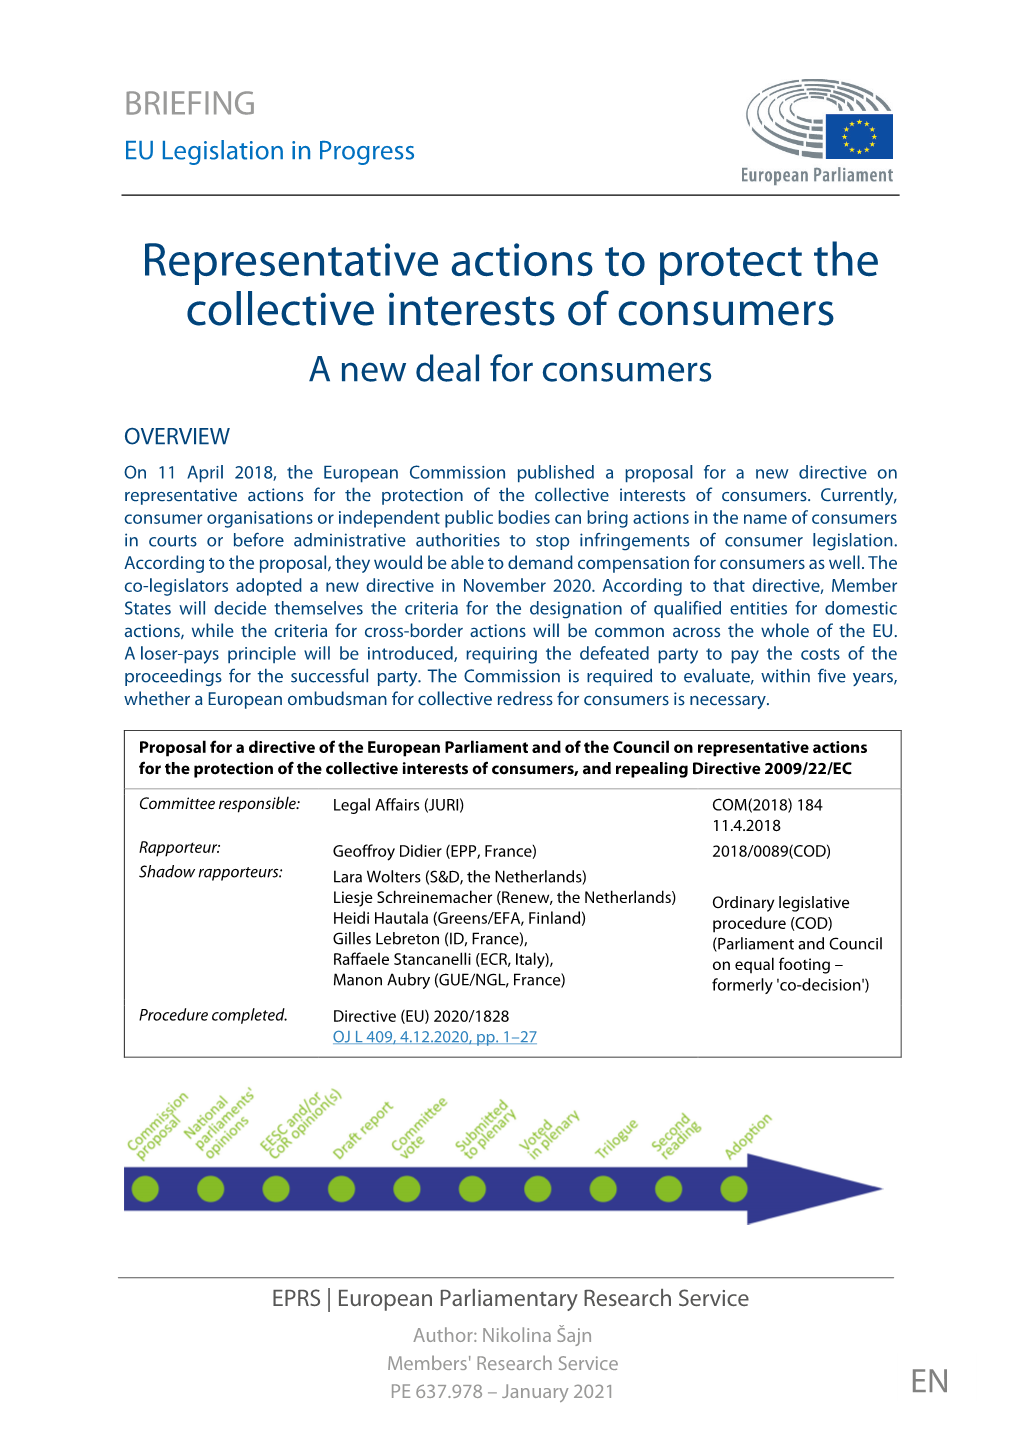 Representative Actions to Protect the Collective Interests of Consumers a New Deal for Consumers